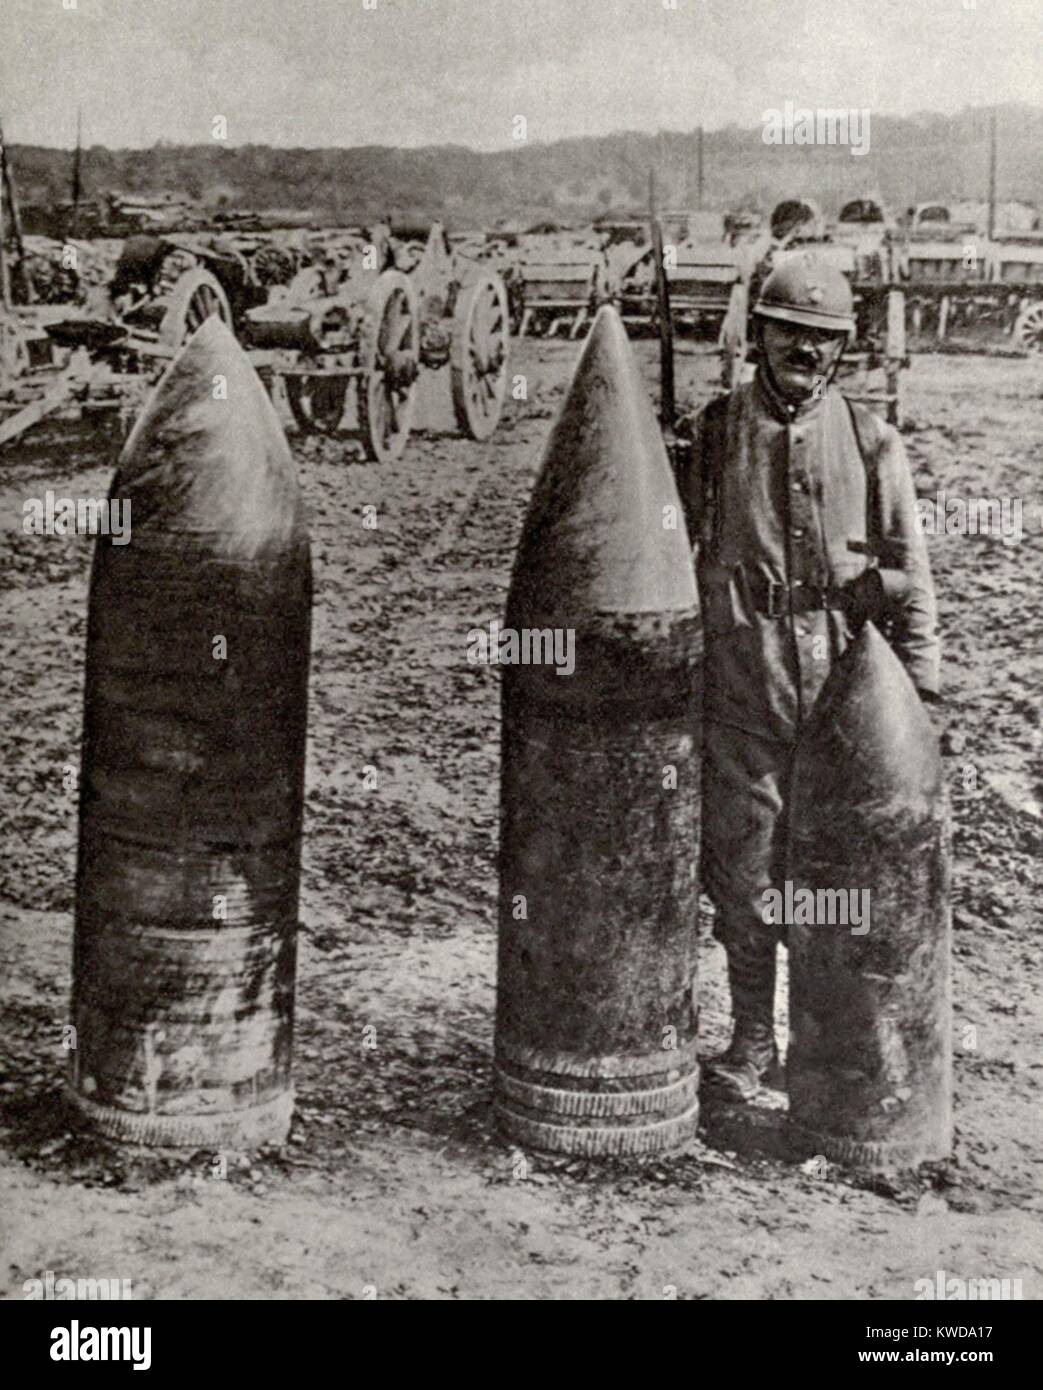 World War 1. French heavy gun, or howitzer, high explosive projectiles, L to R: a 420-mm (16.5 inch) shell, weight 2350 lb.; a 360-mm (14 inch) shell, weight 1400 lb.; and a 305 mm (12 inch) shell, weight 850 lb. (BSLOC 2013 1 121) Stock Photo